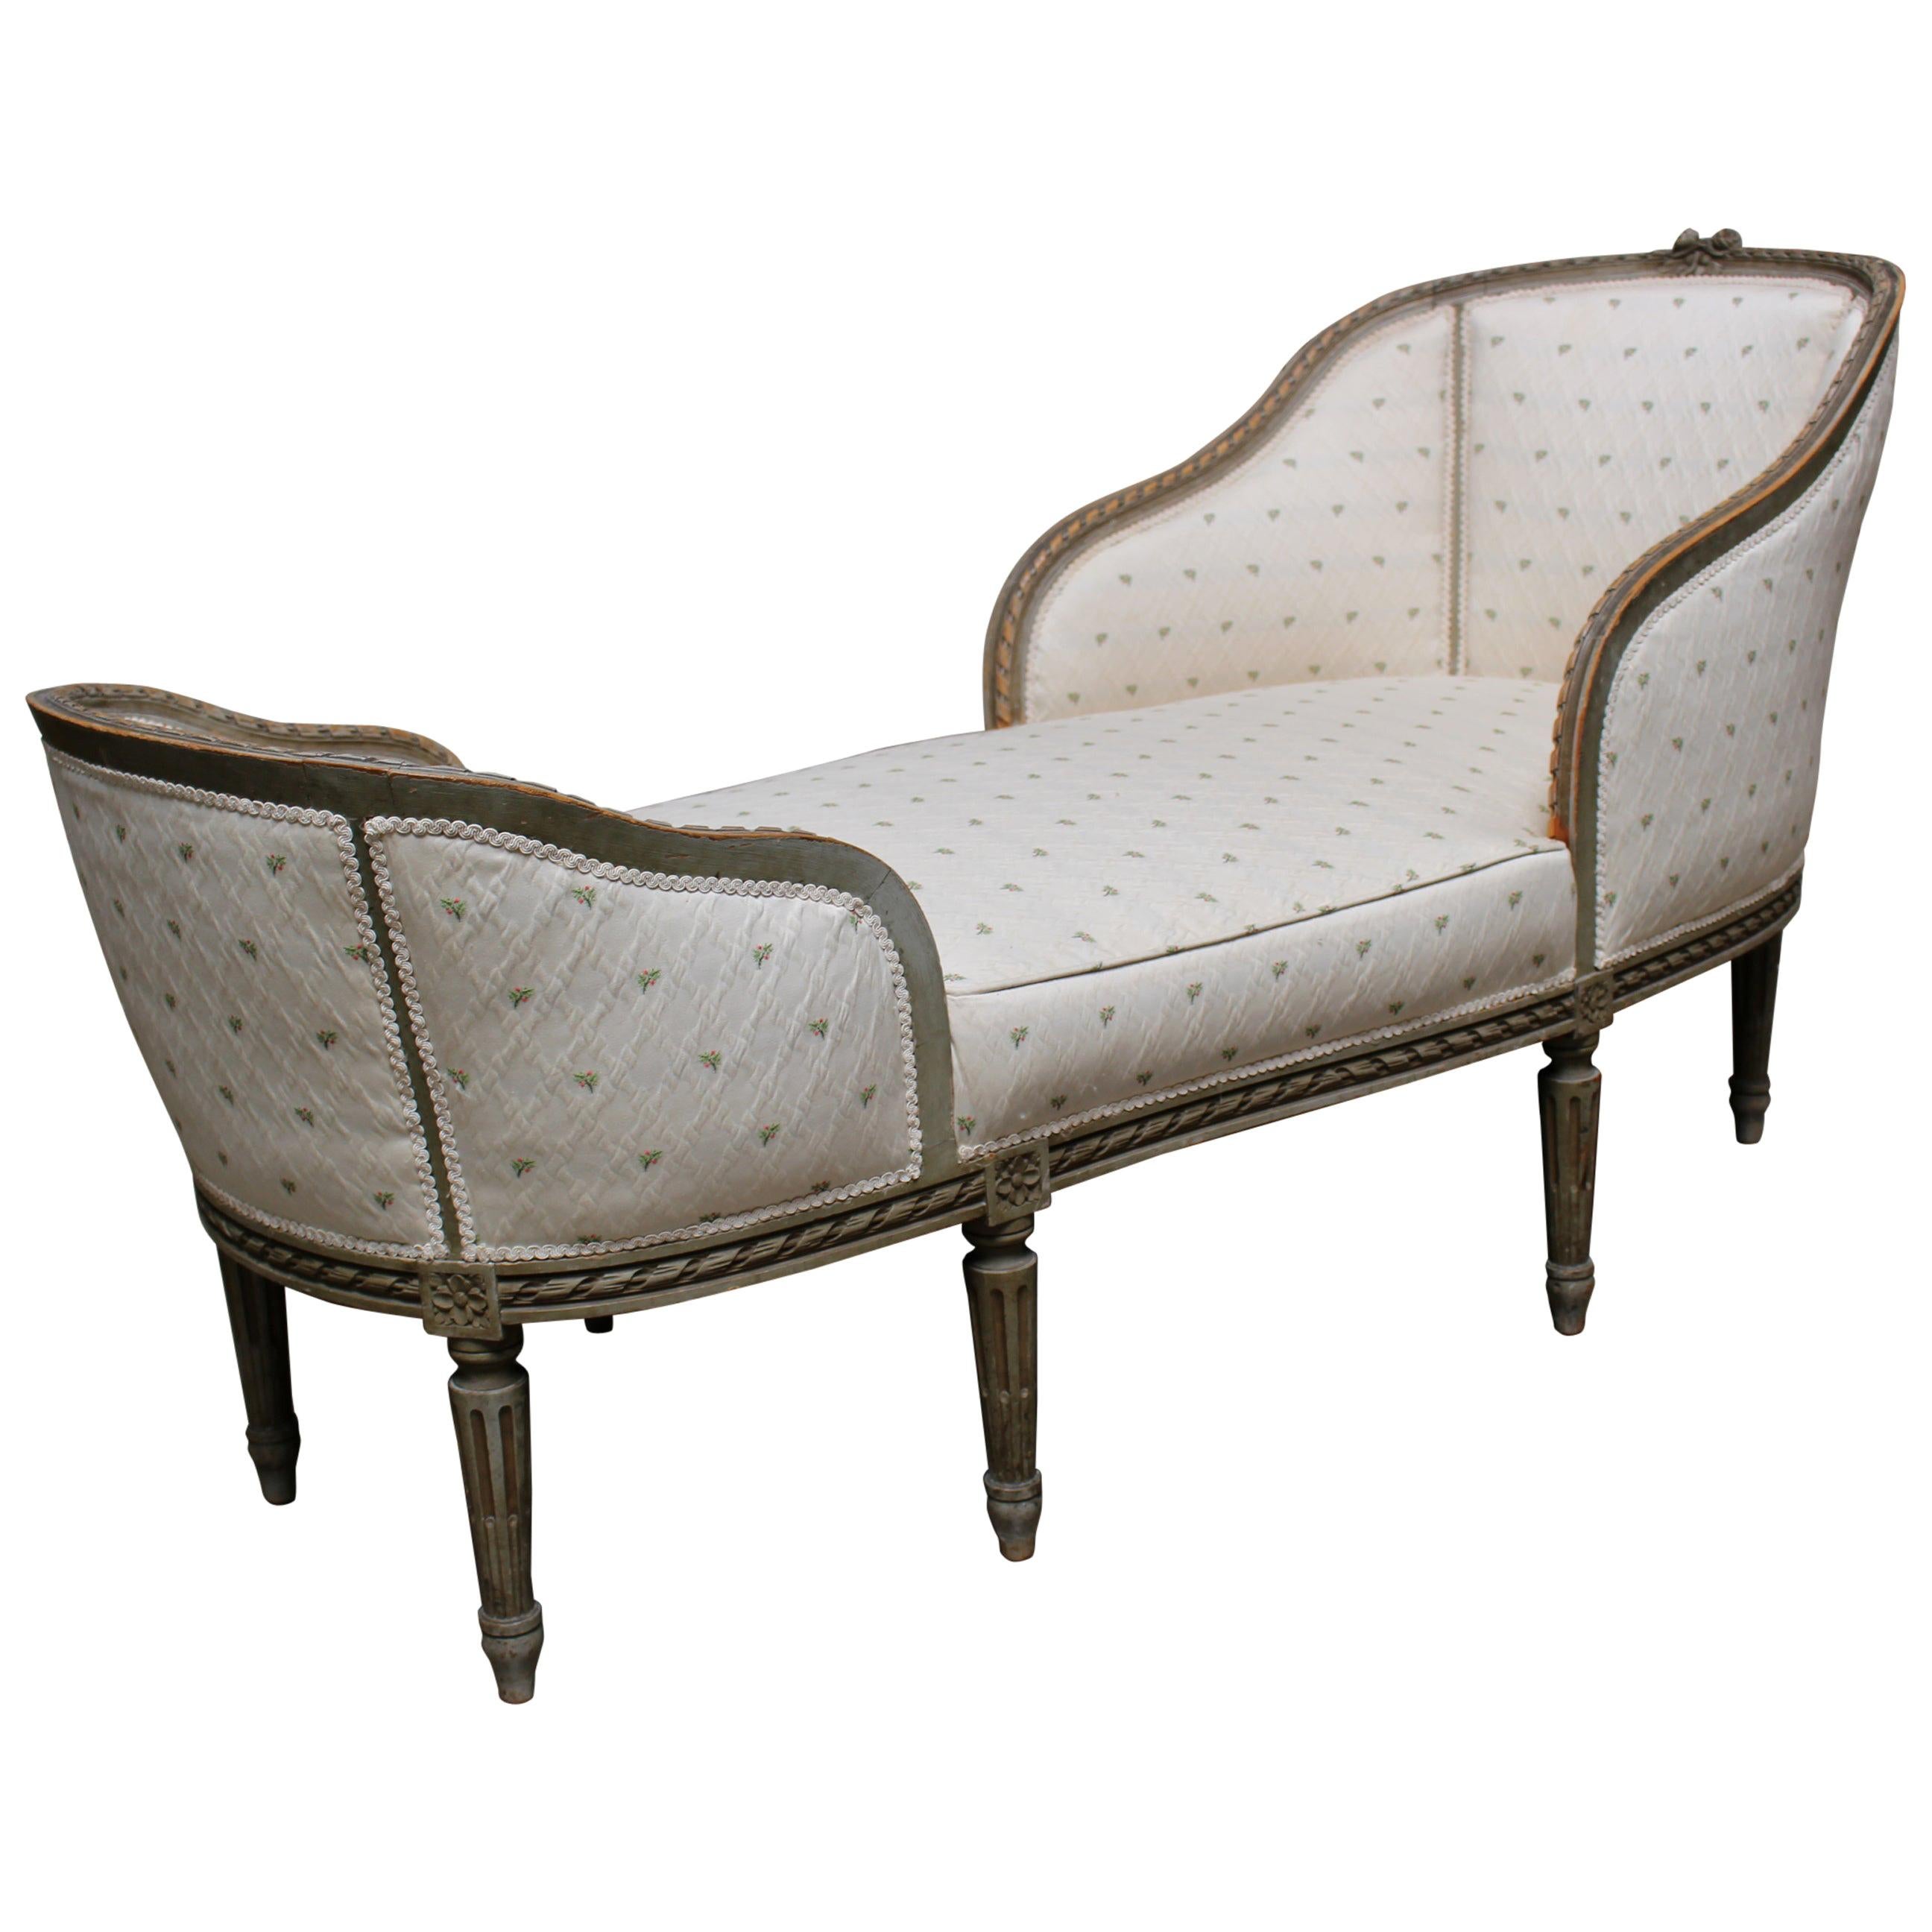 19th Century French Louis XVI Style Chaise Lounge with a Gray Painted Finish For Sale